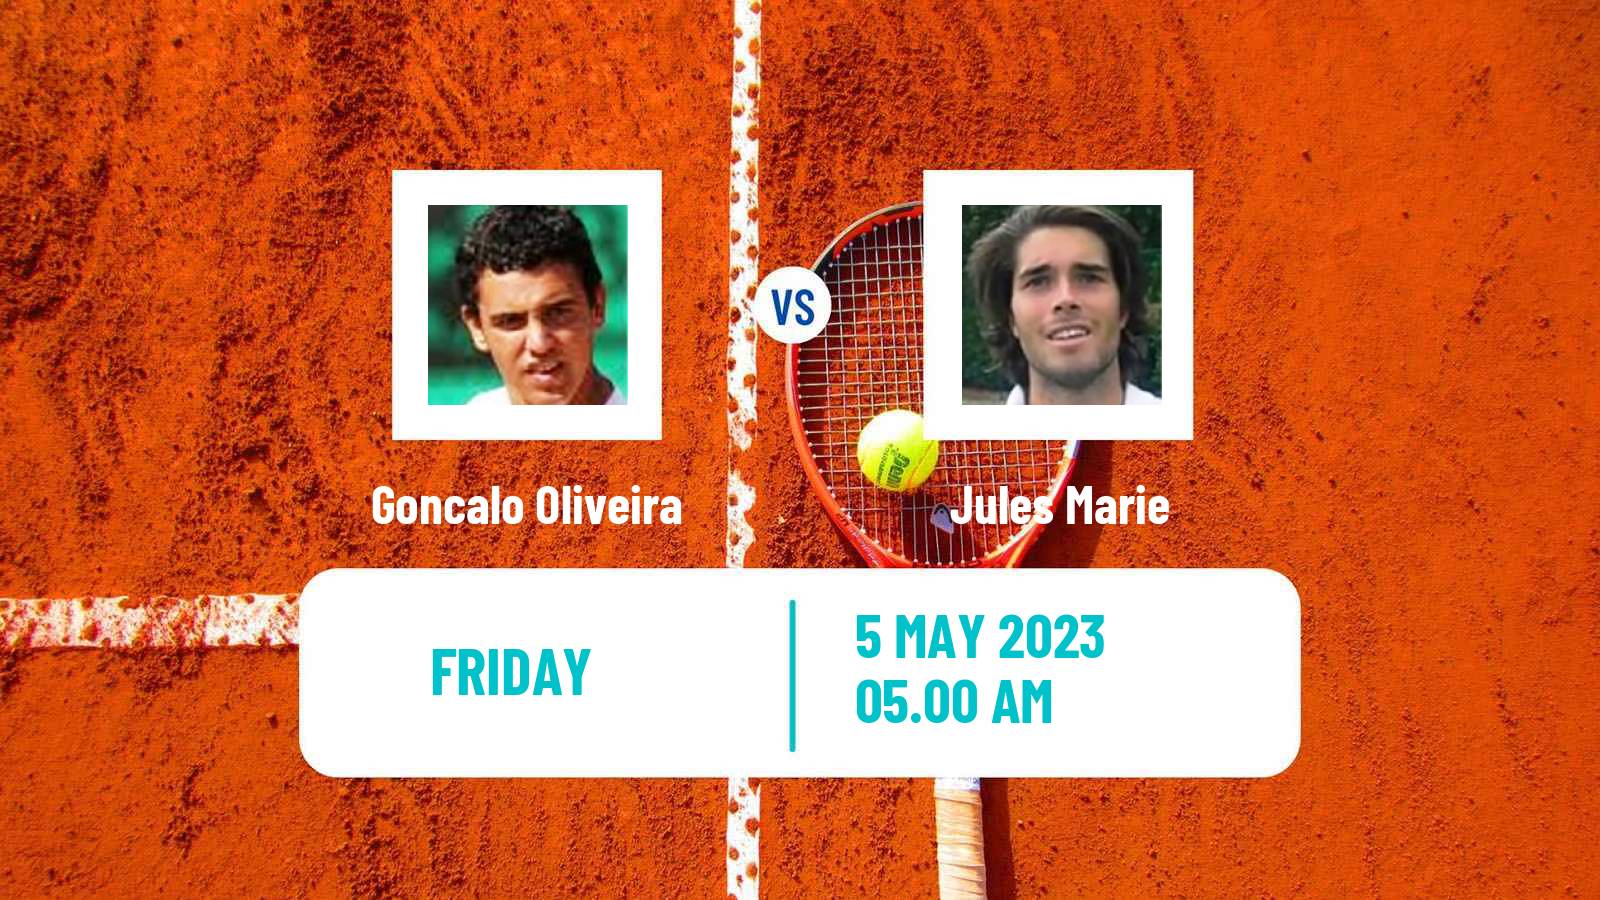 Tennis ITF Tournaments Goncalo Oliveira - Jules Marie